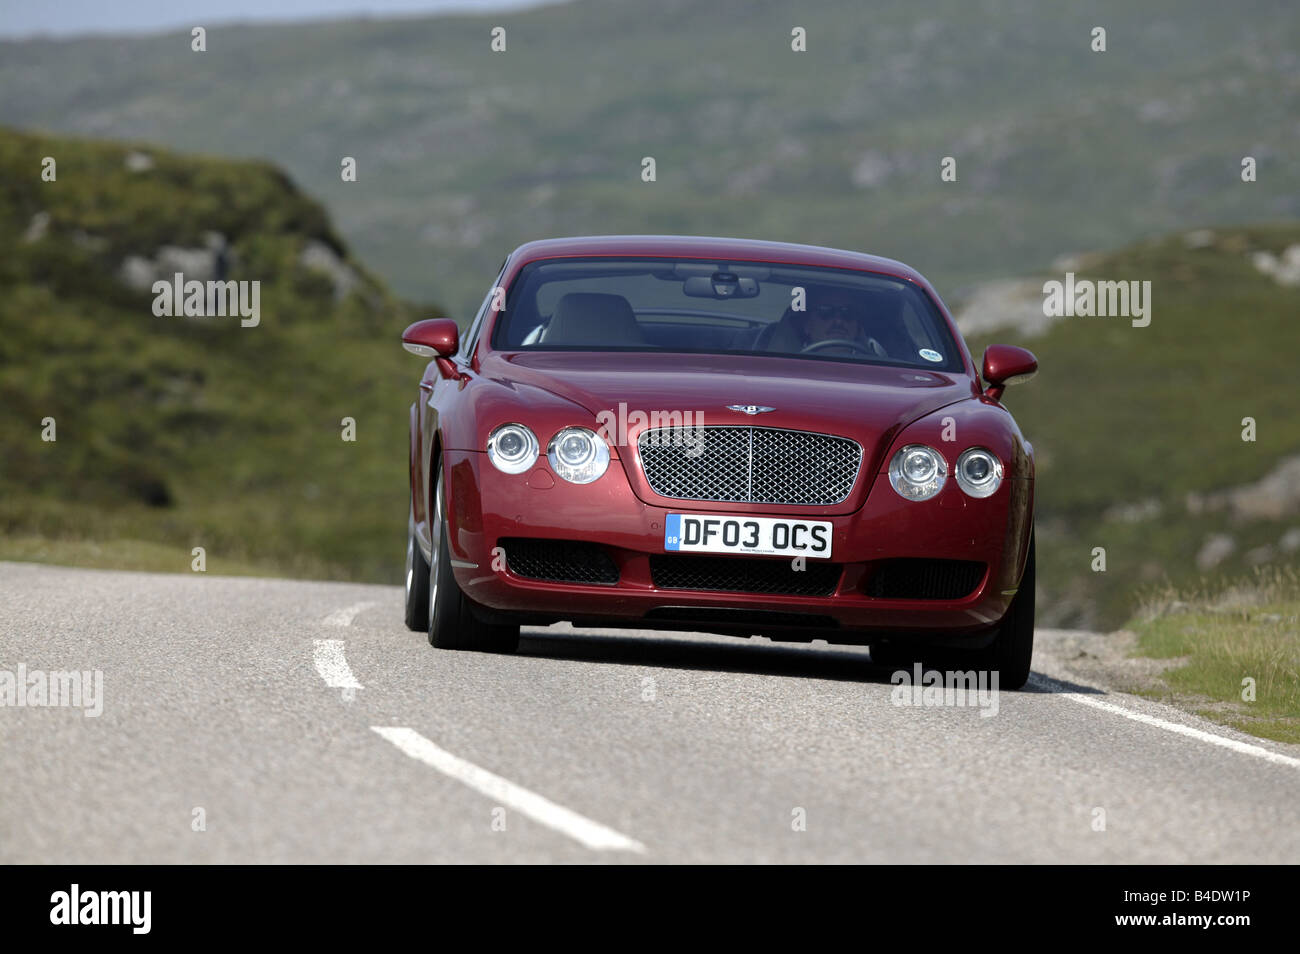 Car, Bentley Continental GT, model year 2003-, Coupe, Luxury approx.s, ruby colored, driving, country road, diagonal from the fr Stock Photo